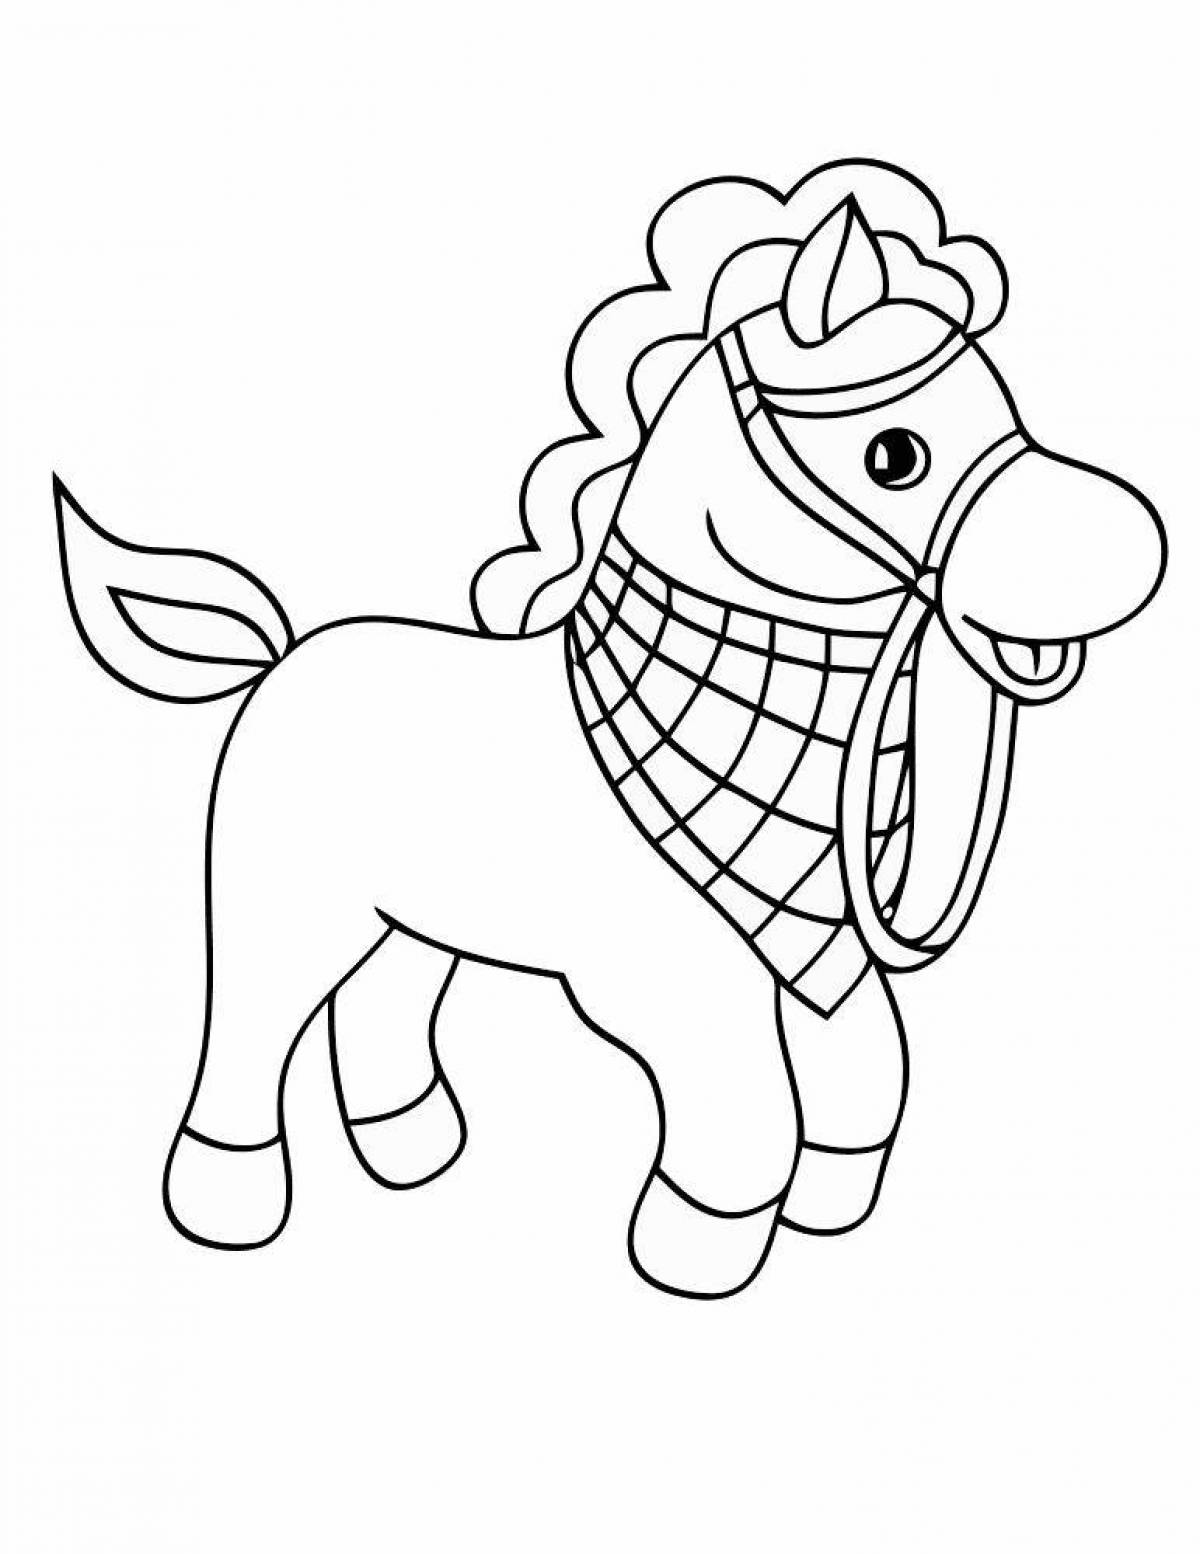 Agile baby horse coloring page